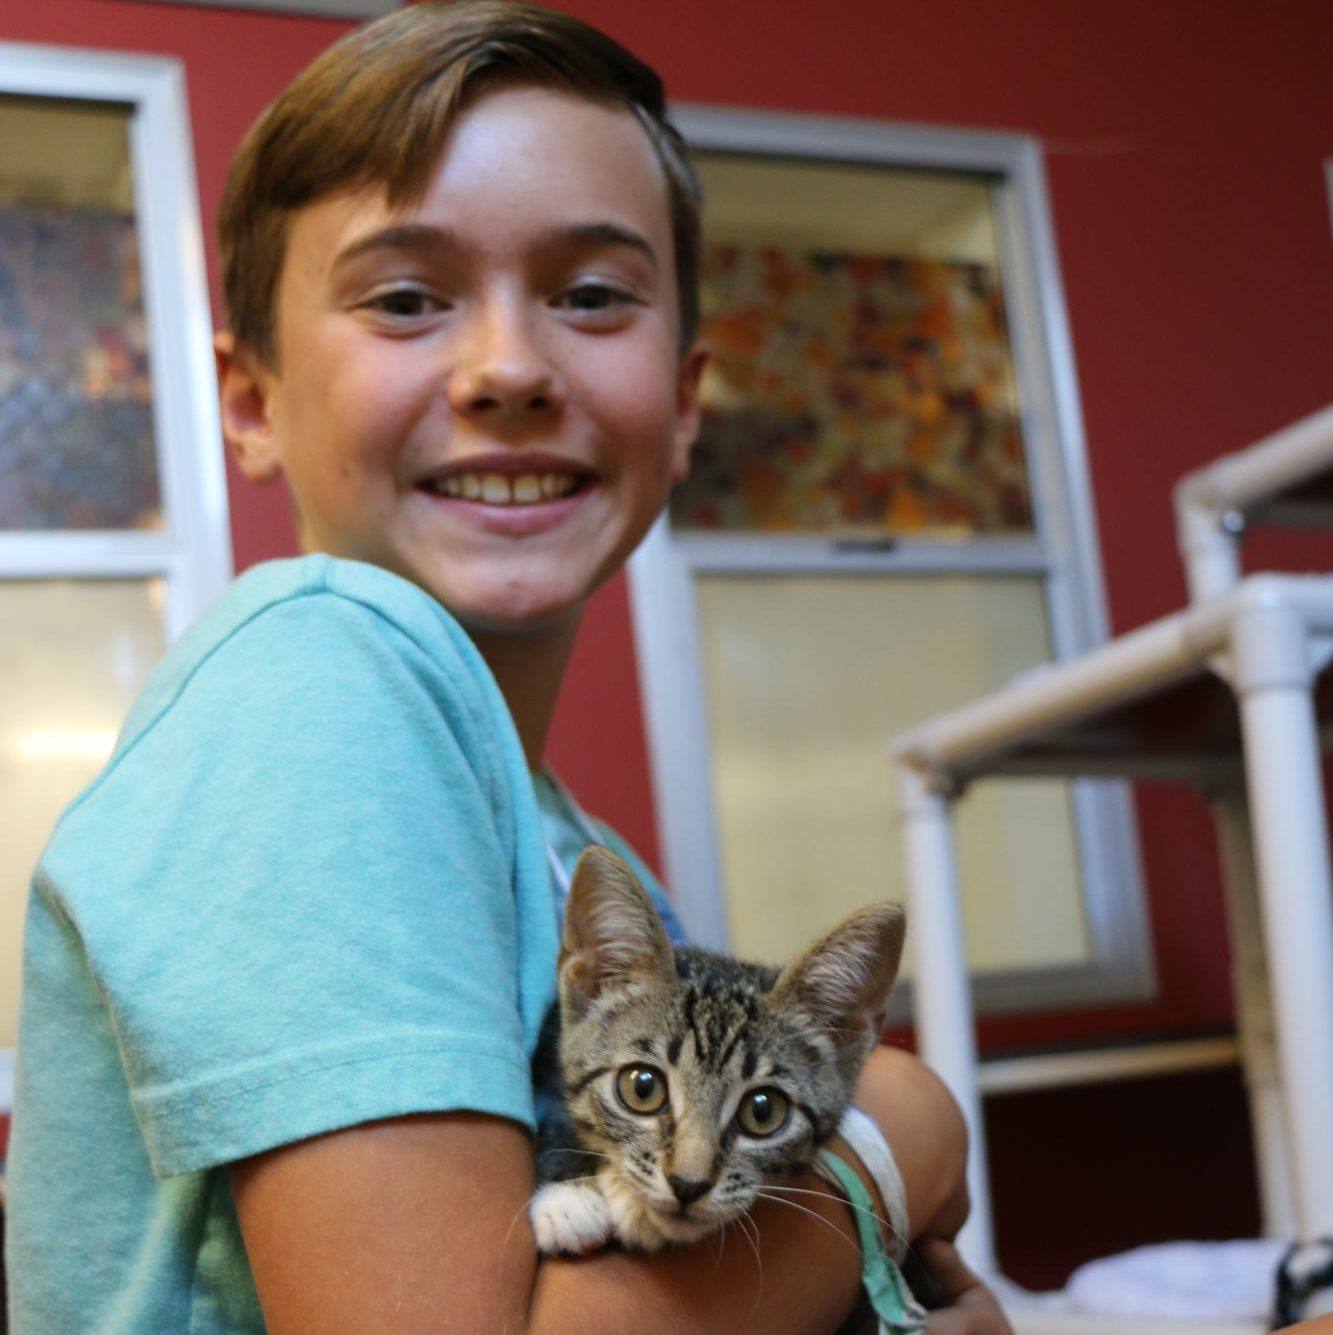 Young boy with small kitten